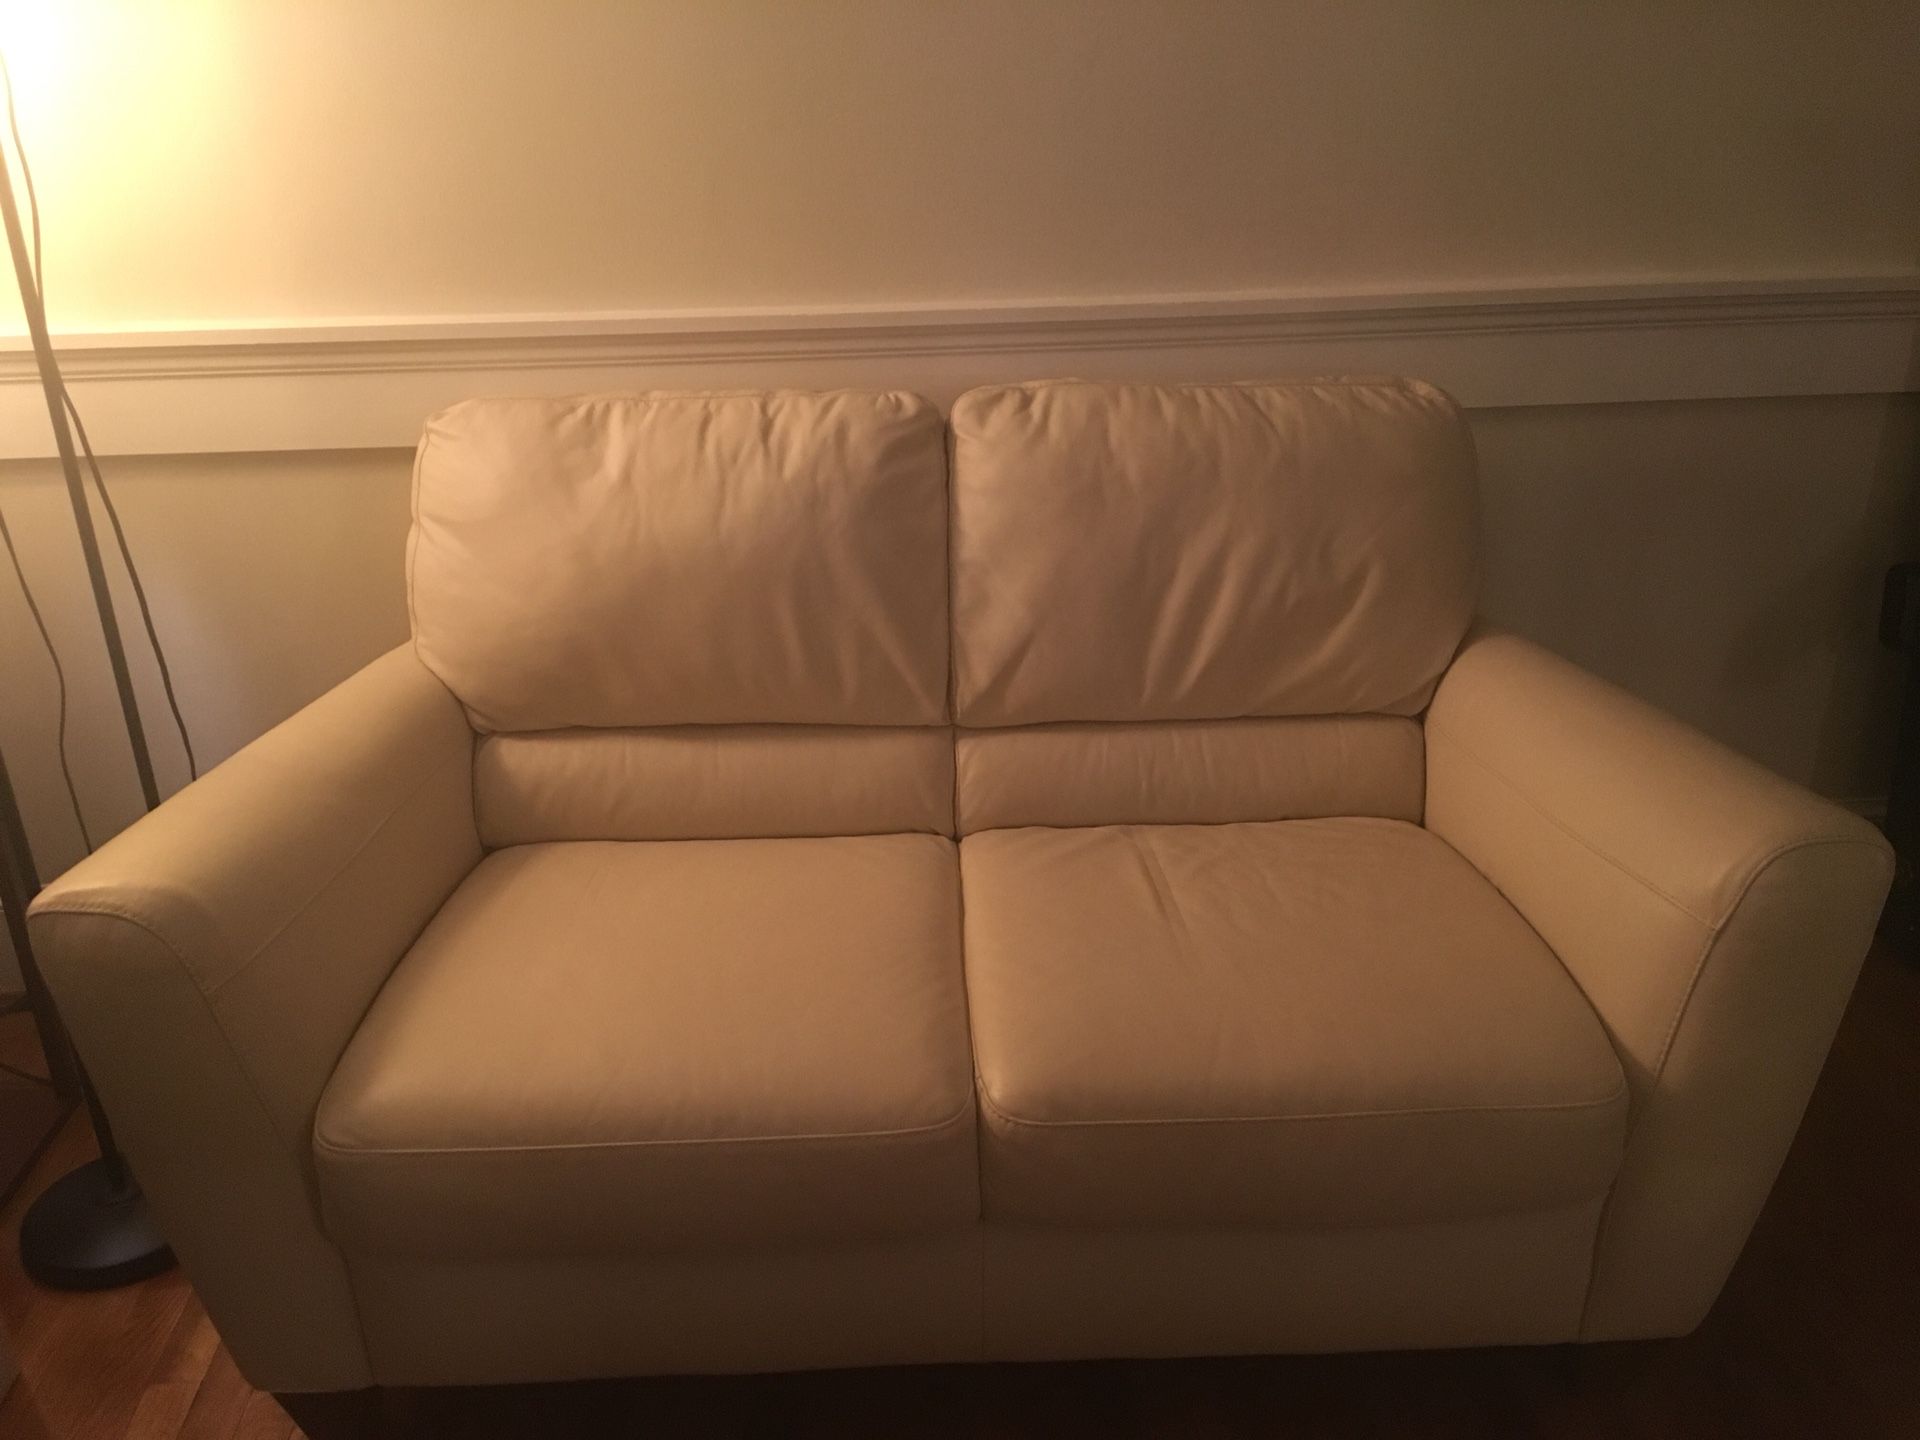 Macy’s white love seat leather